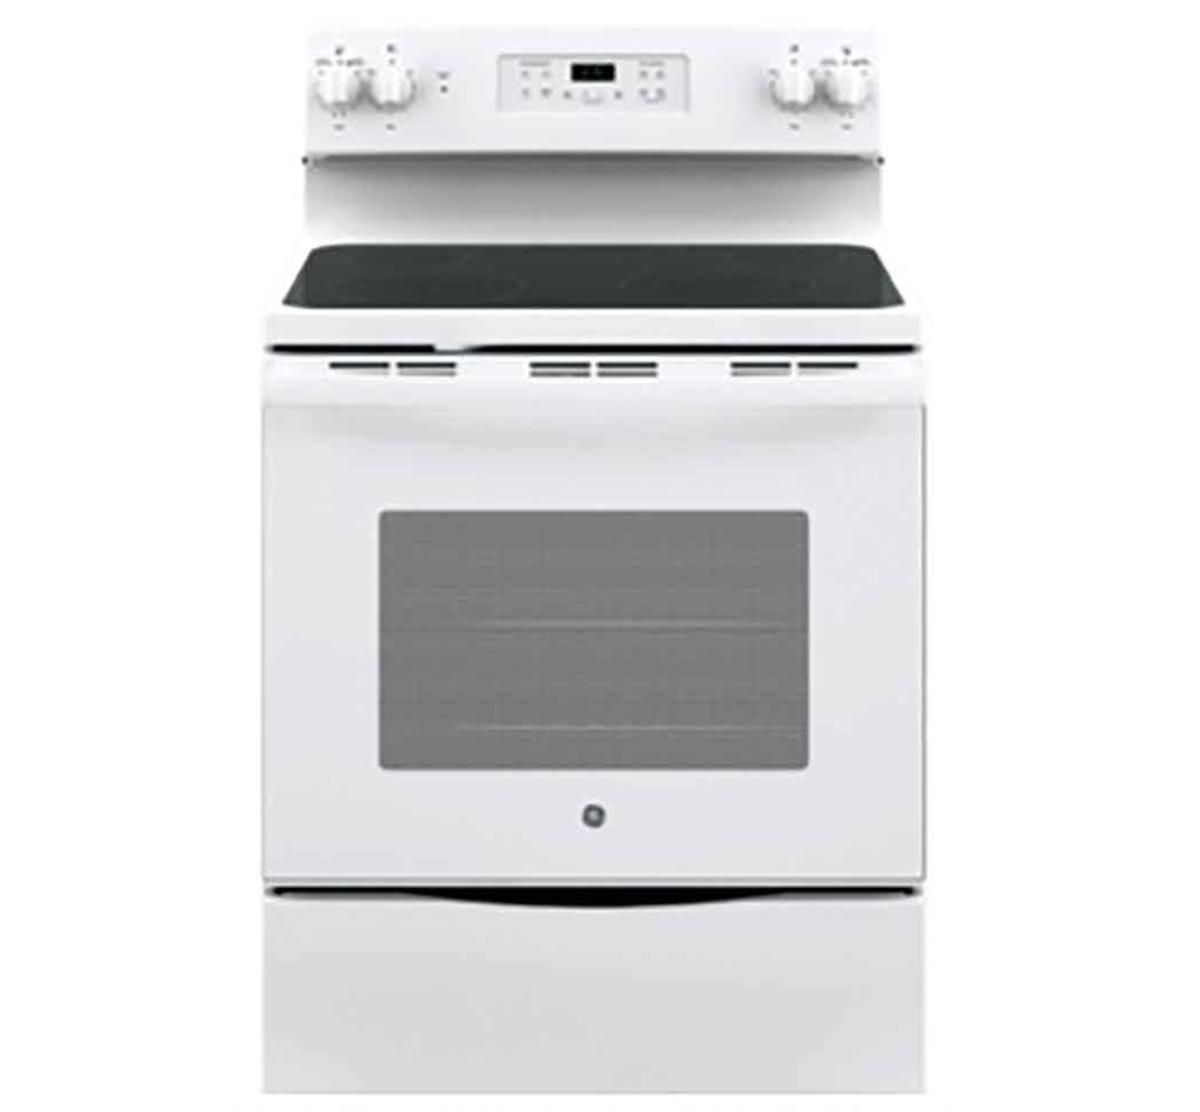 Picture of G.E. 5.3 CU. FT. ELECTRIC RANGE